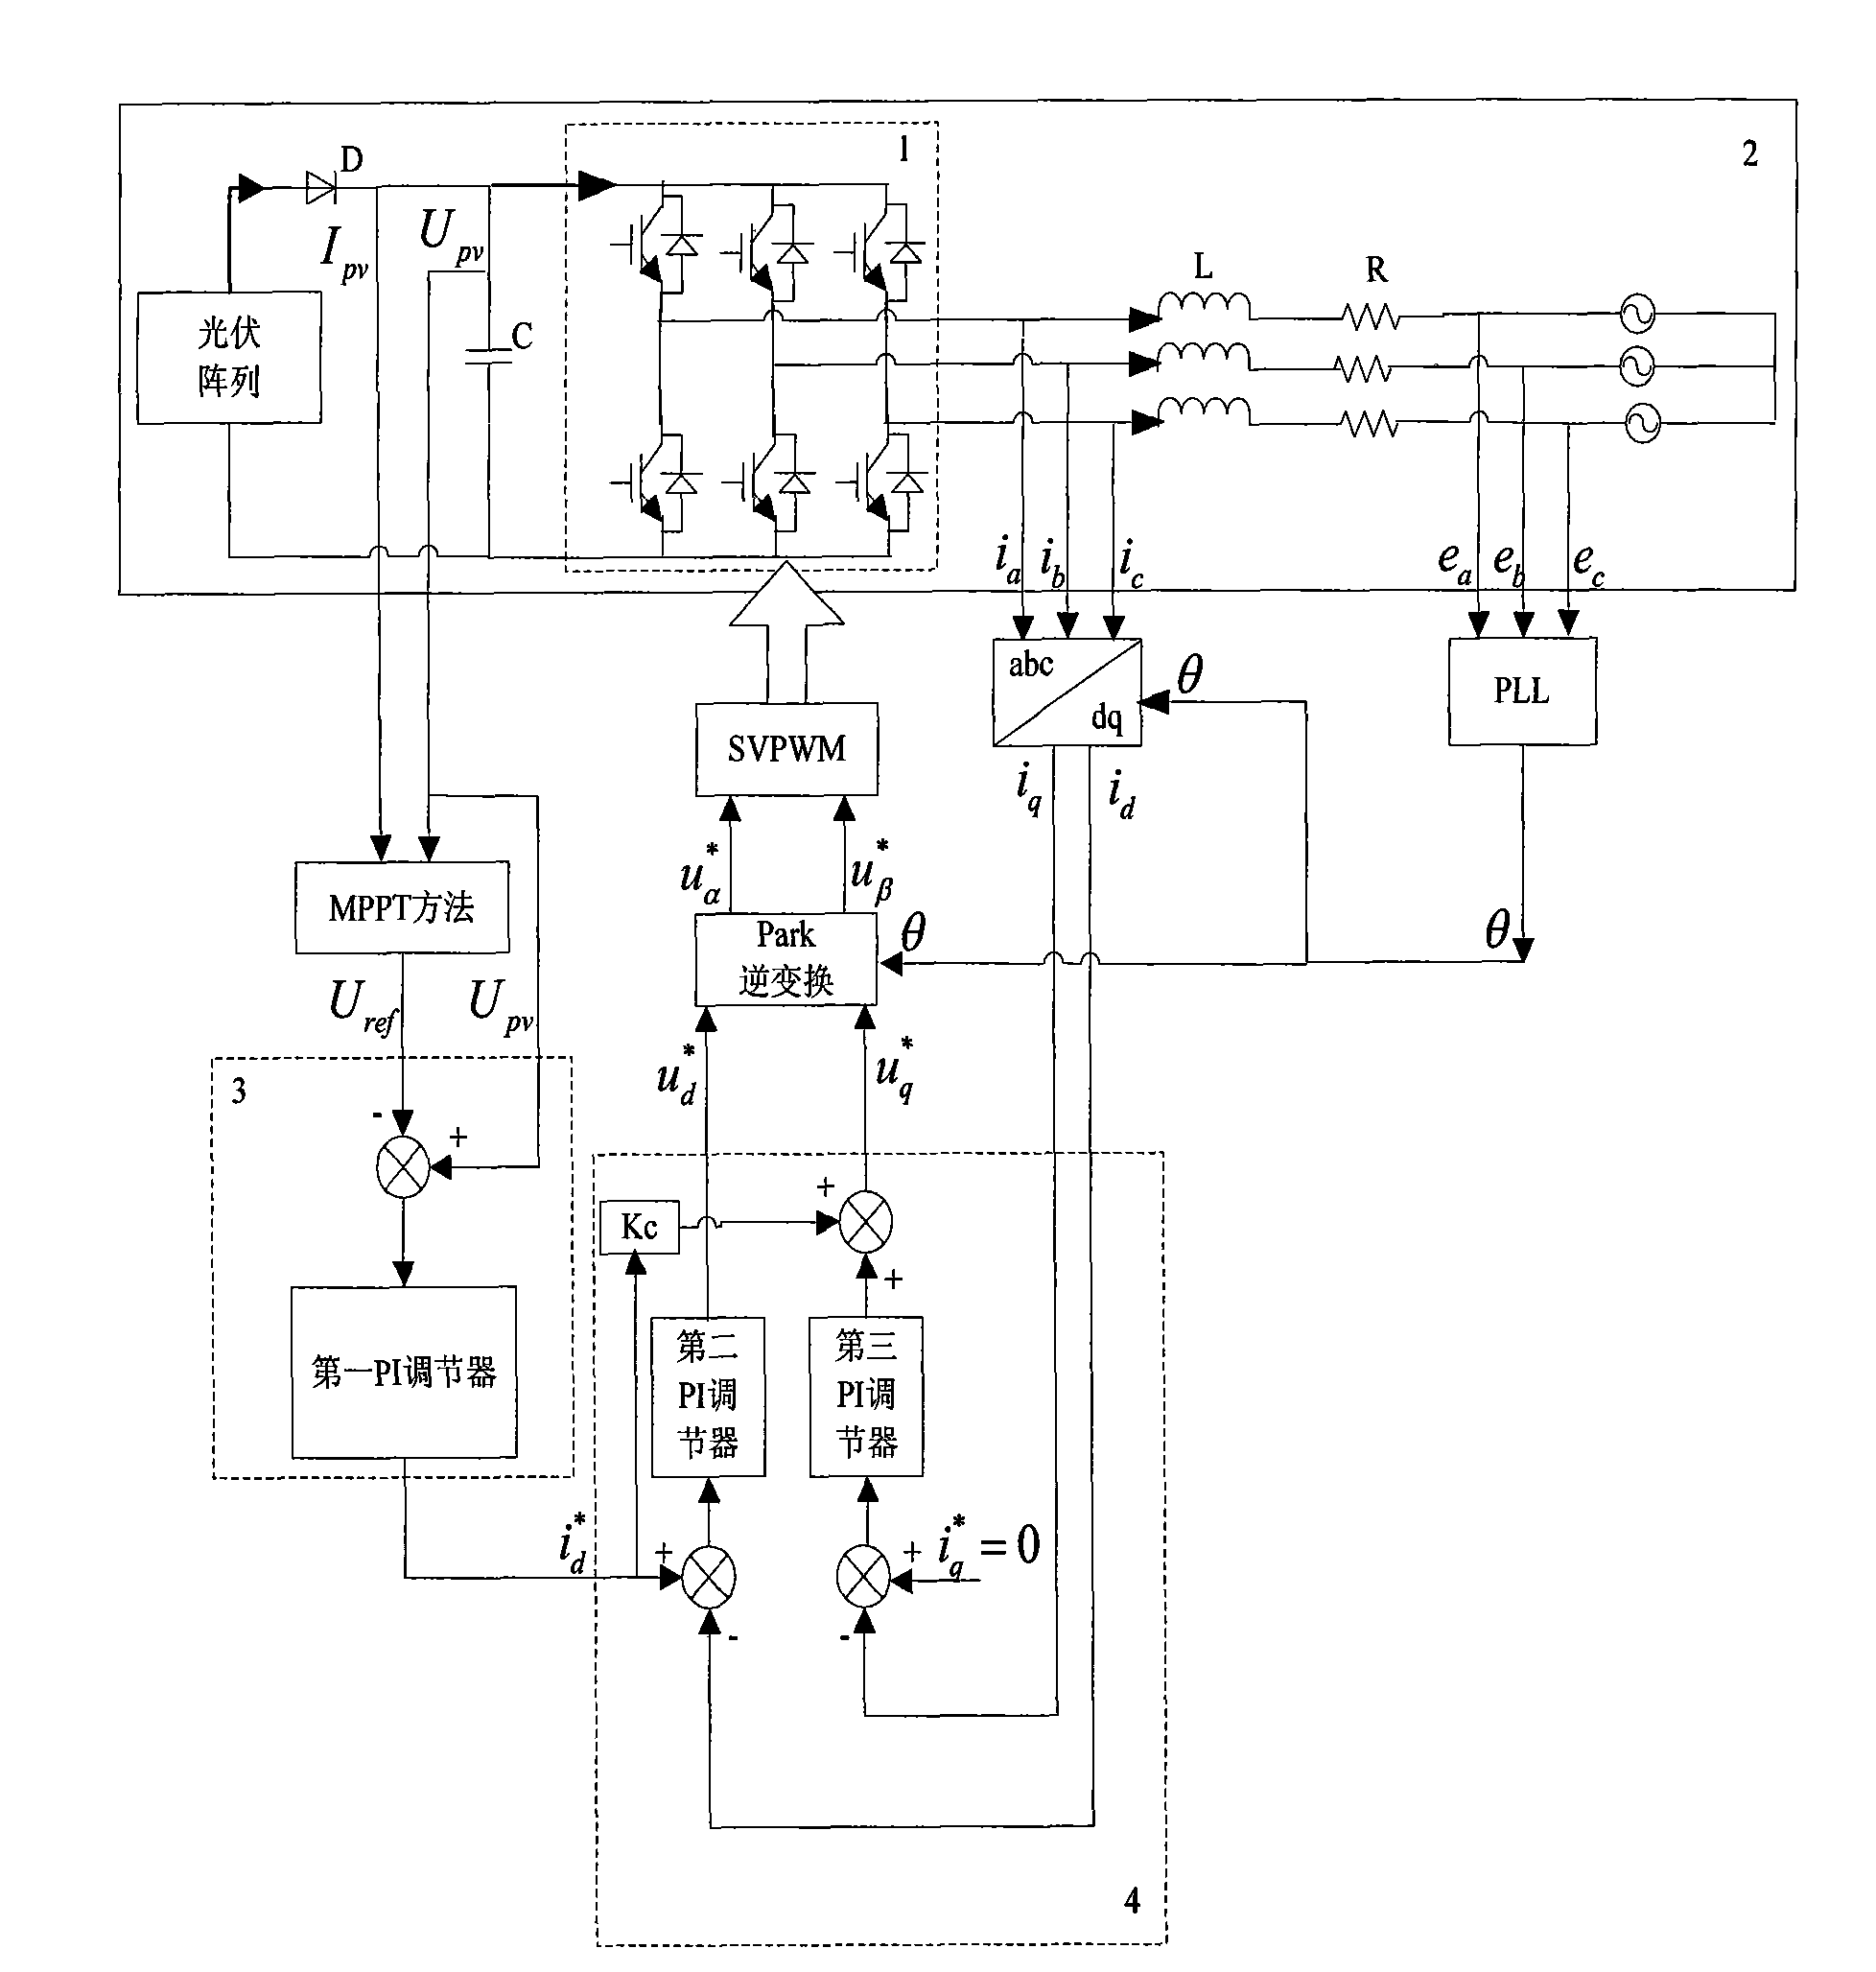 Maximum power tracking control method for monopole three-phase photovoltaic grid-connected system